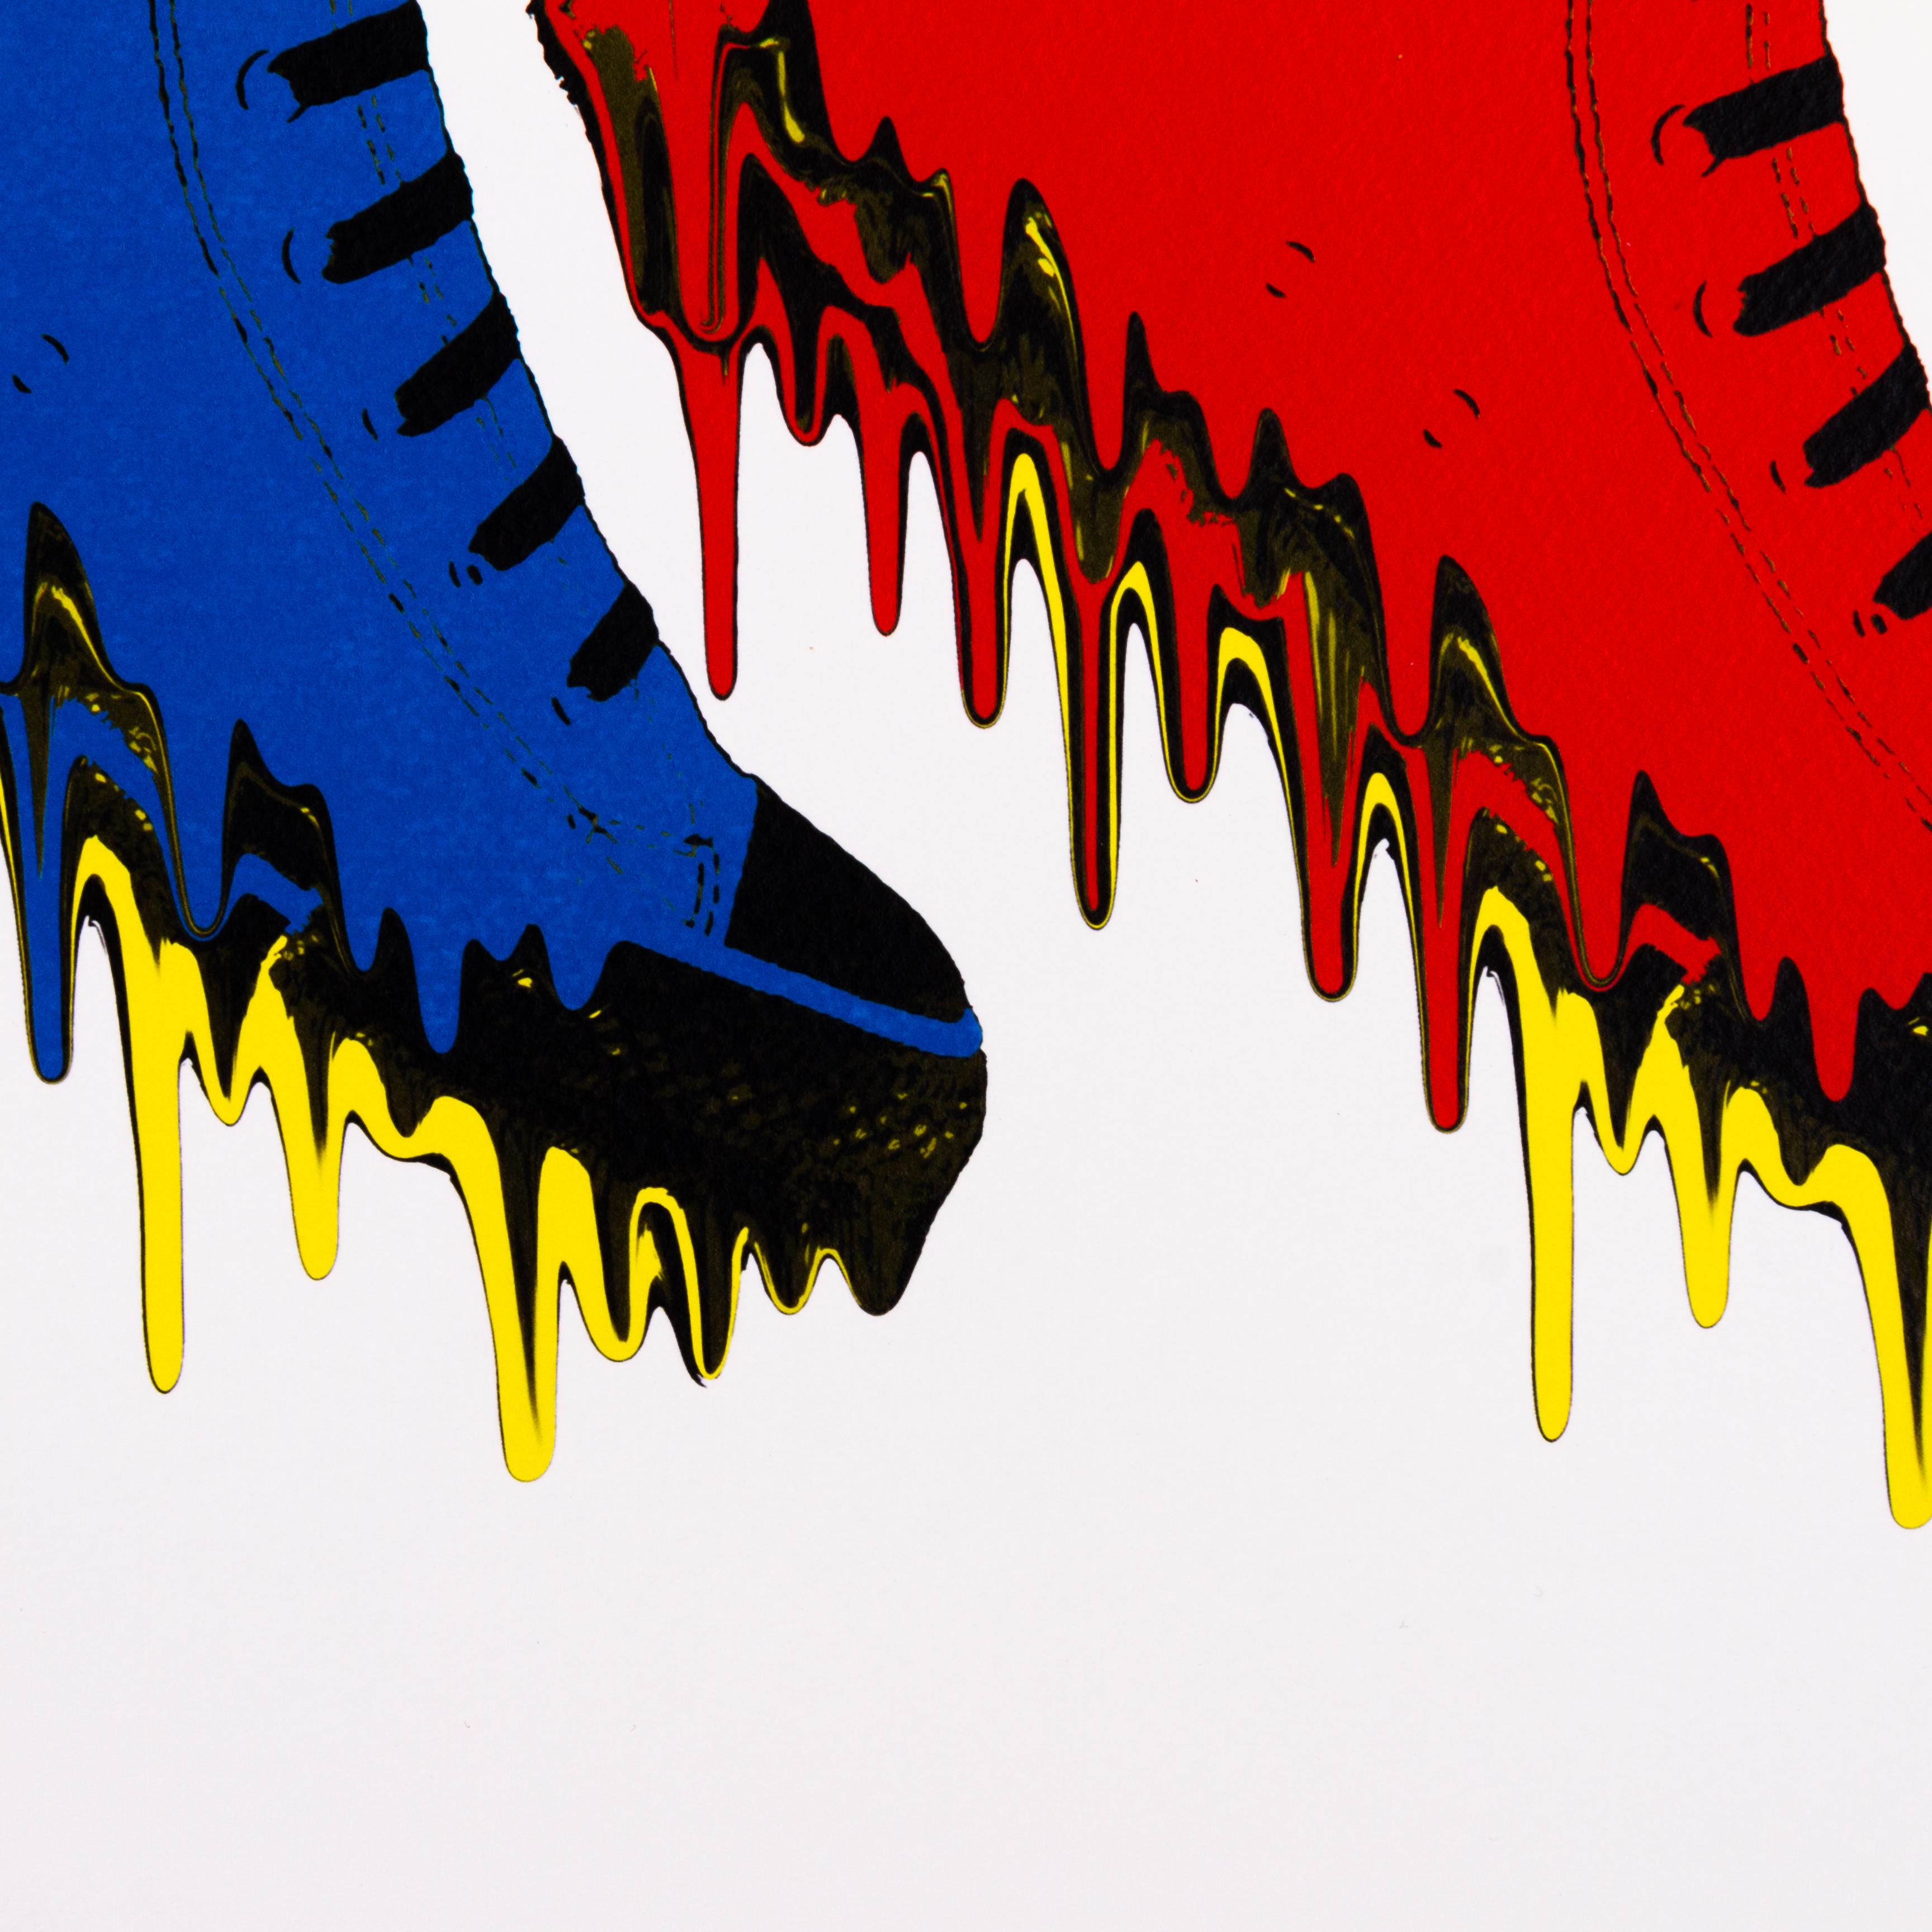 From a private collection.
Death NYC Signed Limited Ed Pop Art Print Converse Sneaker